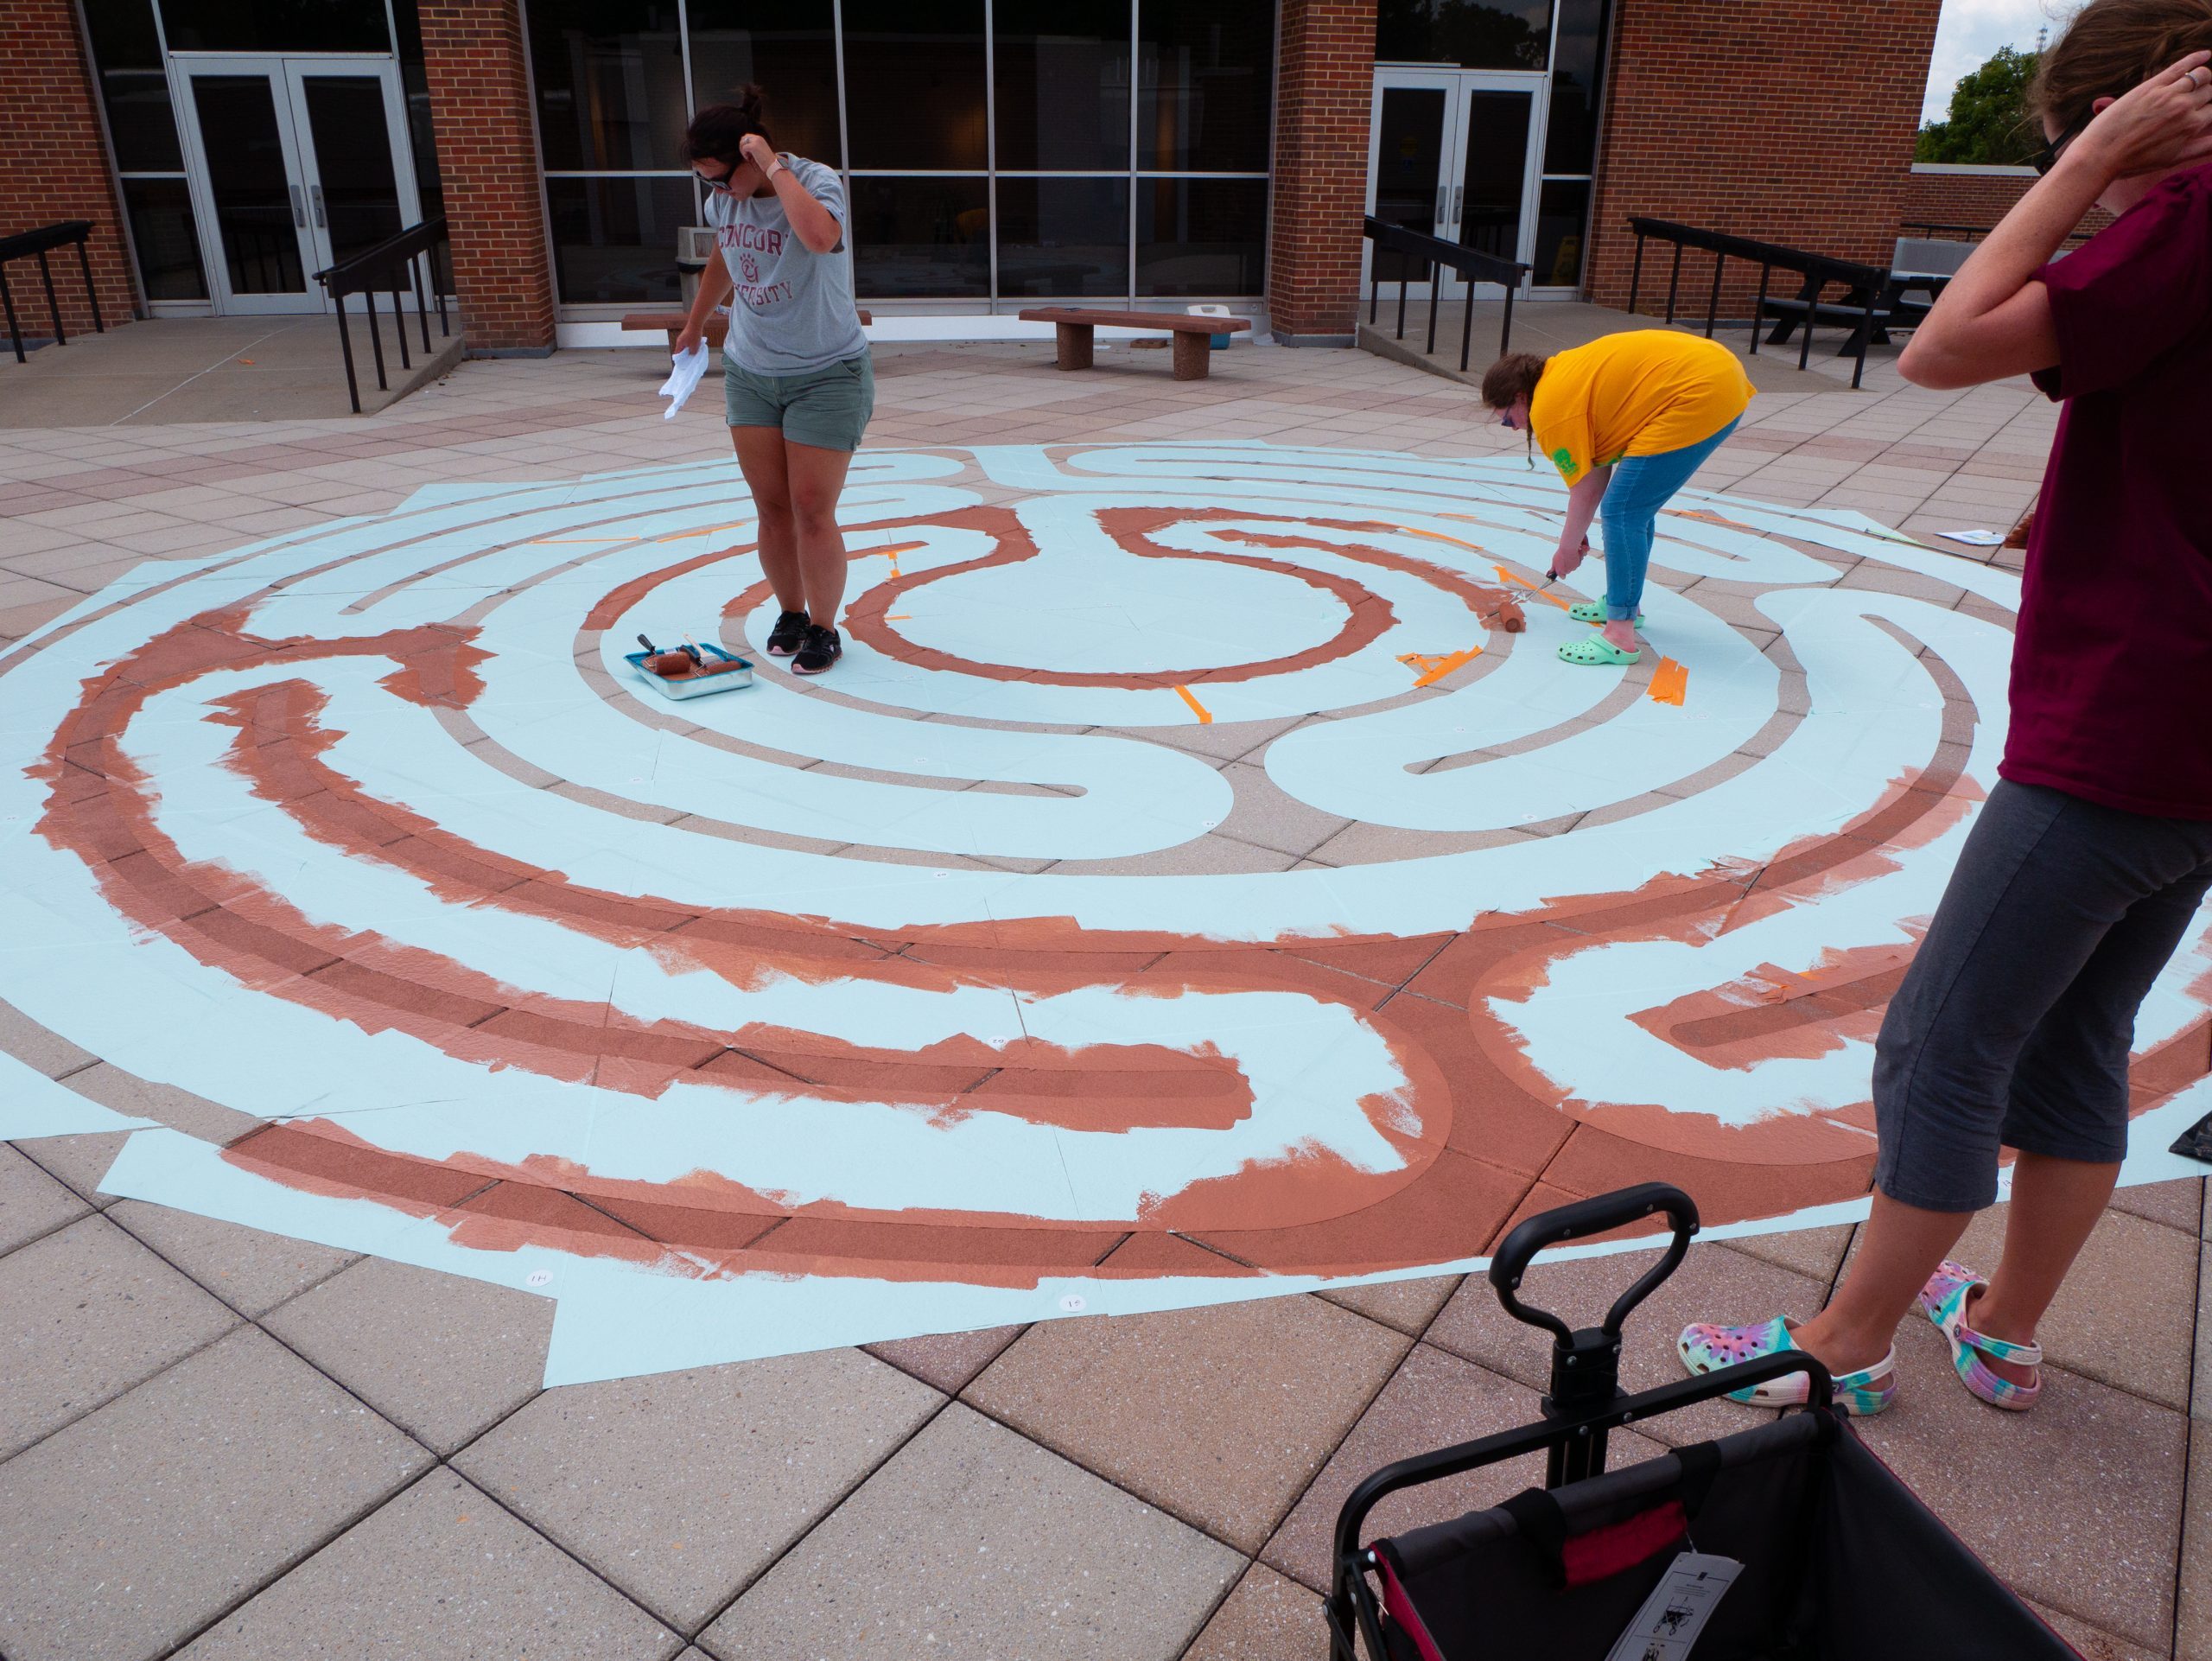 Concord University staff and students painting the labyrinth